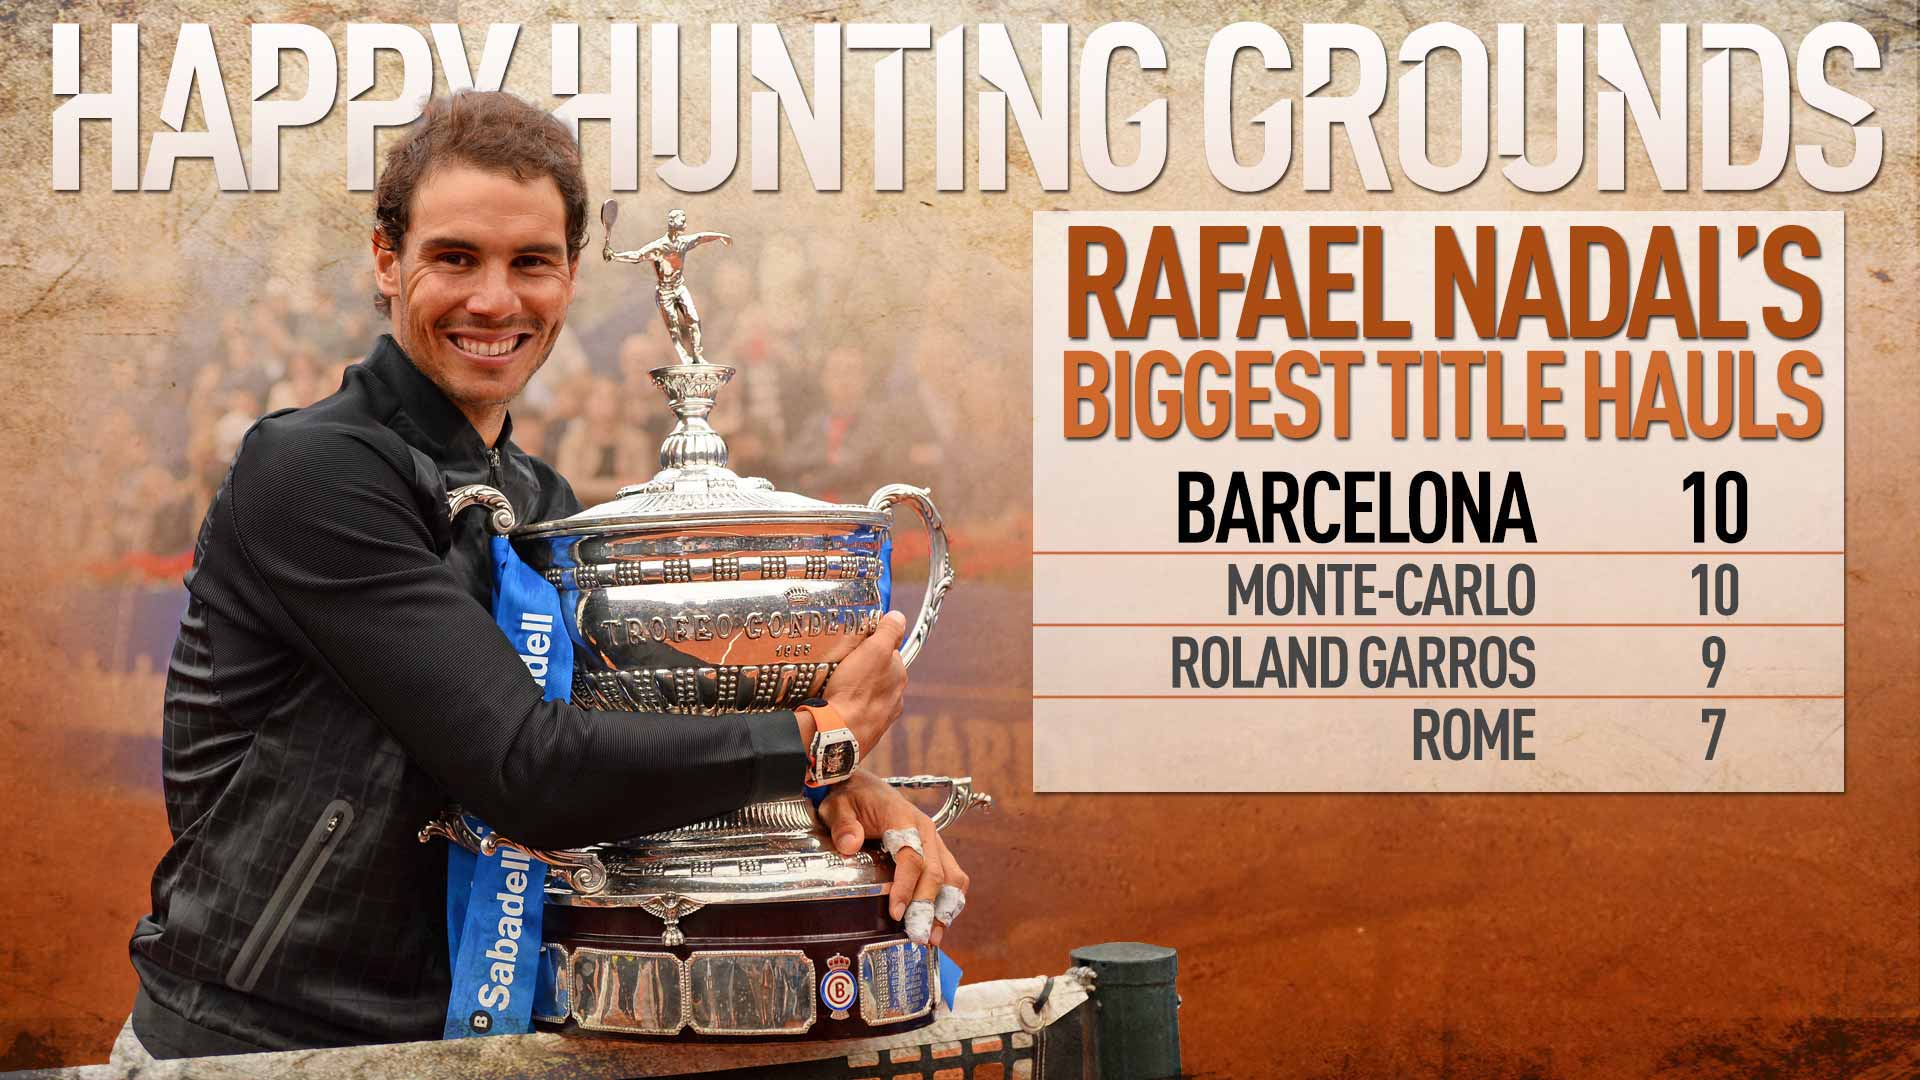 Rafael Nadal has won 10 titles in both Barcelona and Monte-Carlo.